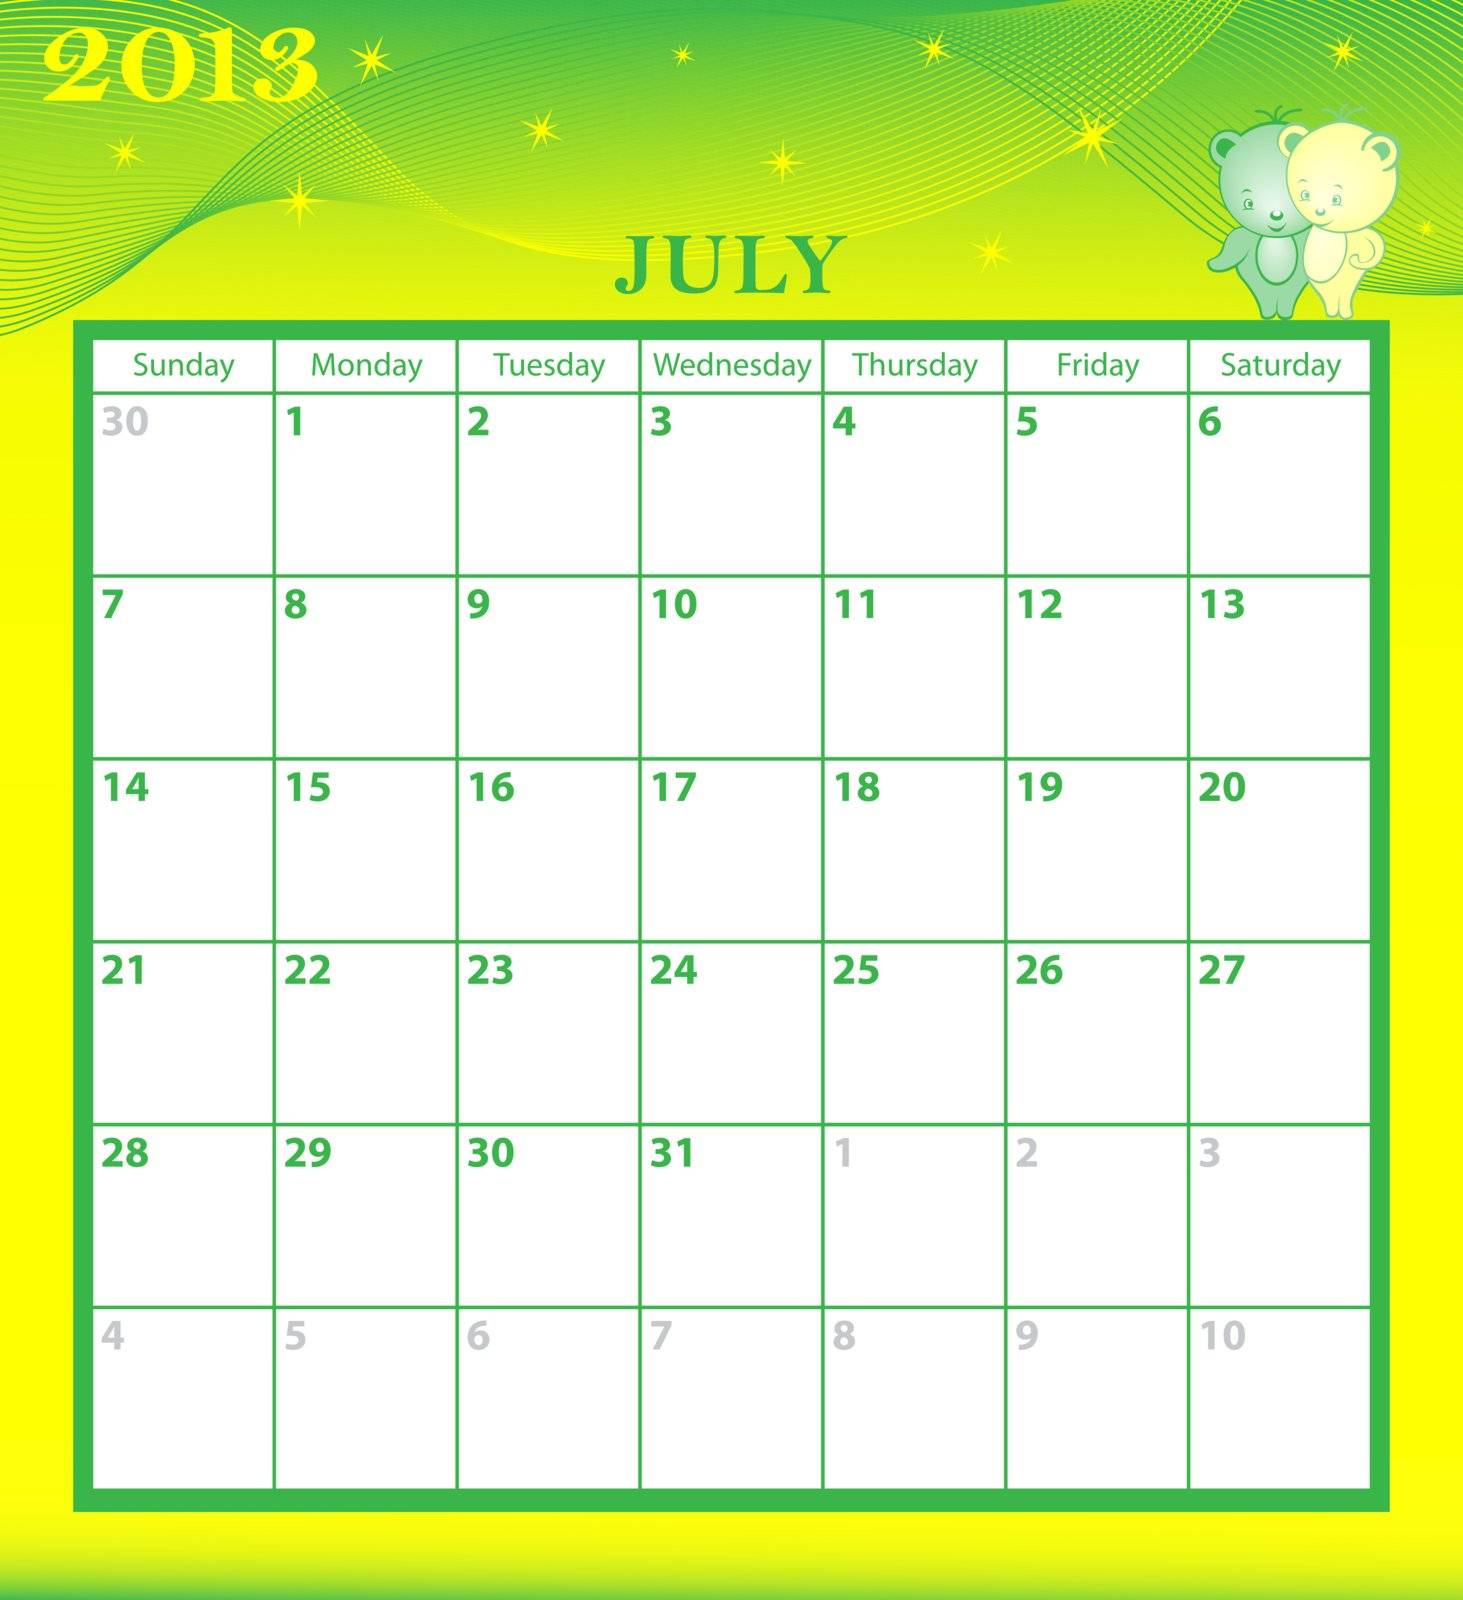 Calendar 2013 July  month with large date boxes. Cartoon characters and patterned background. January to December months available.